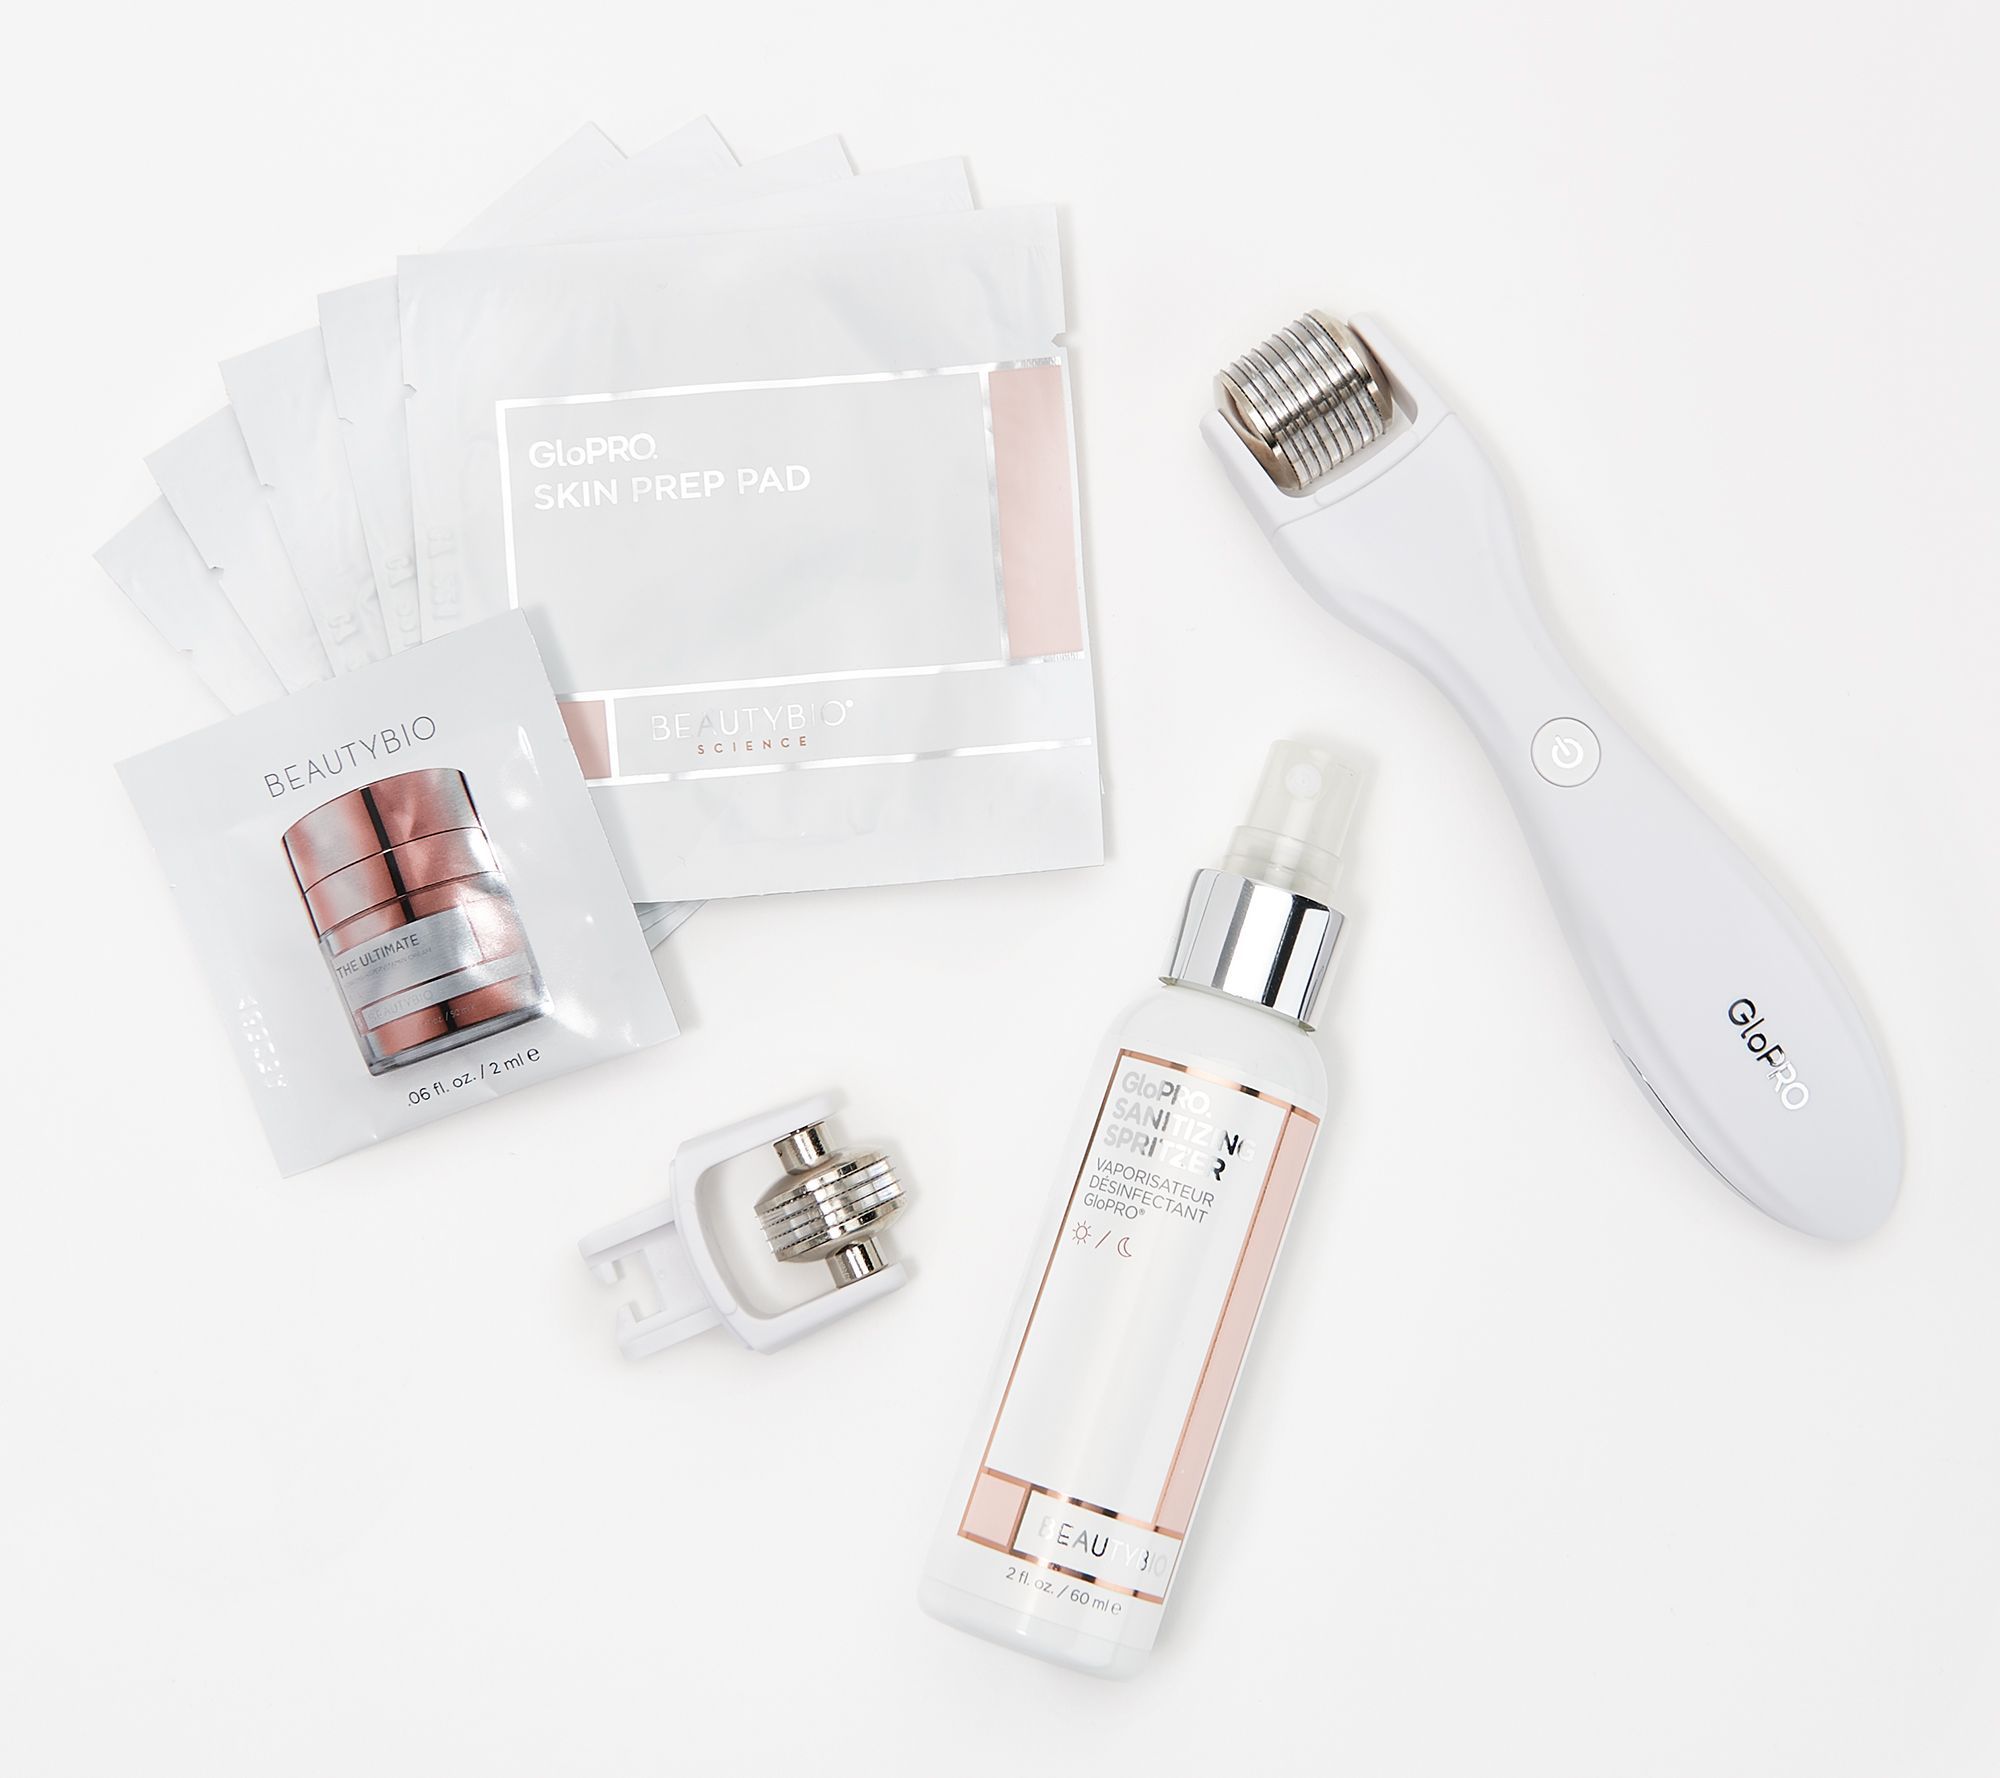 BeautyBio GloPRO Facial Tool with Eye Attachment Auto-Delivery — QVC.com | QVC